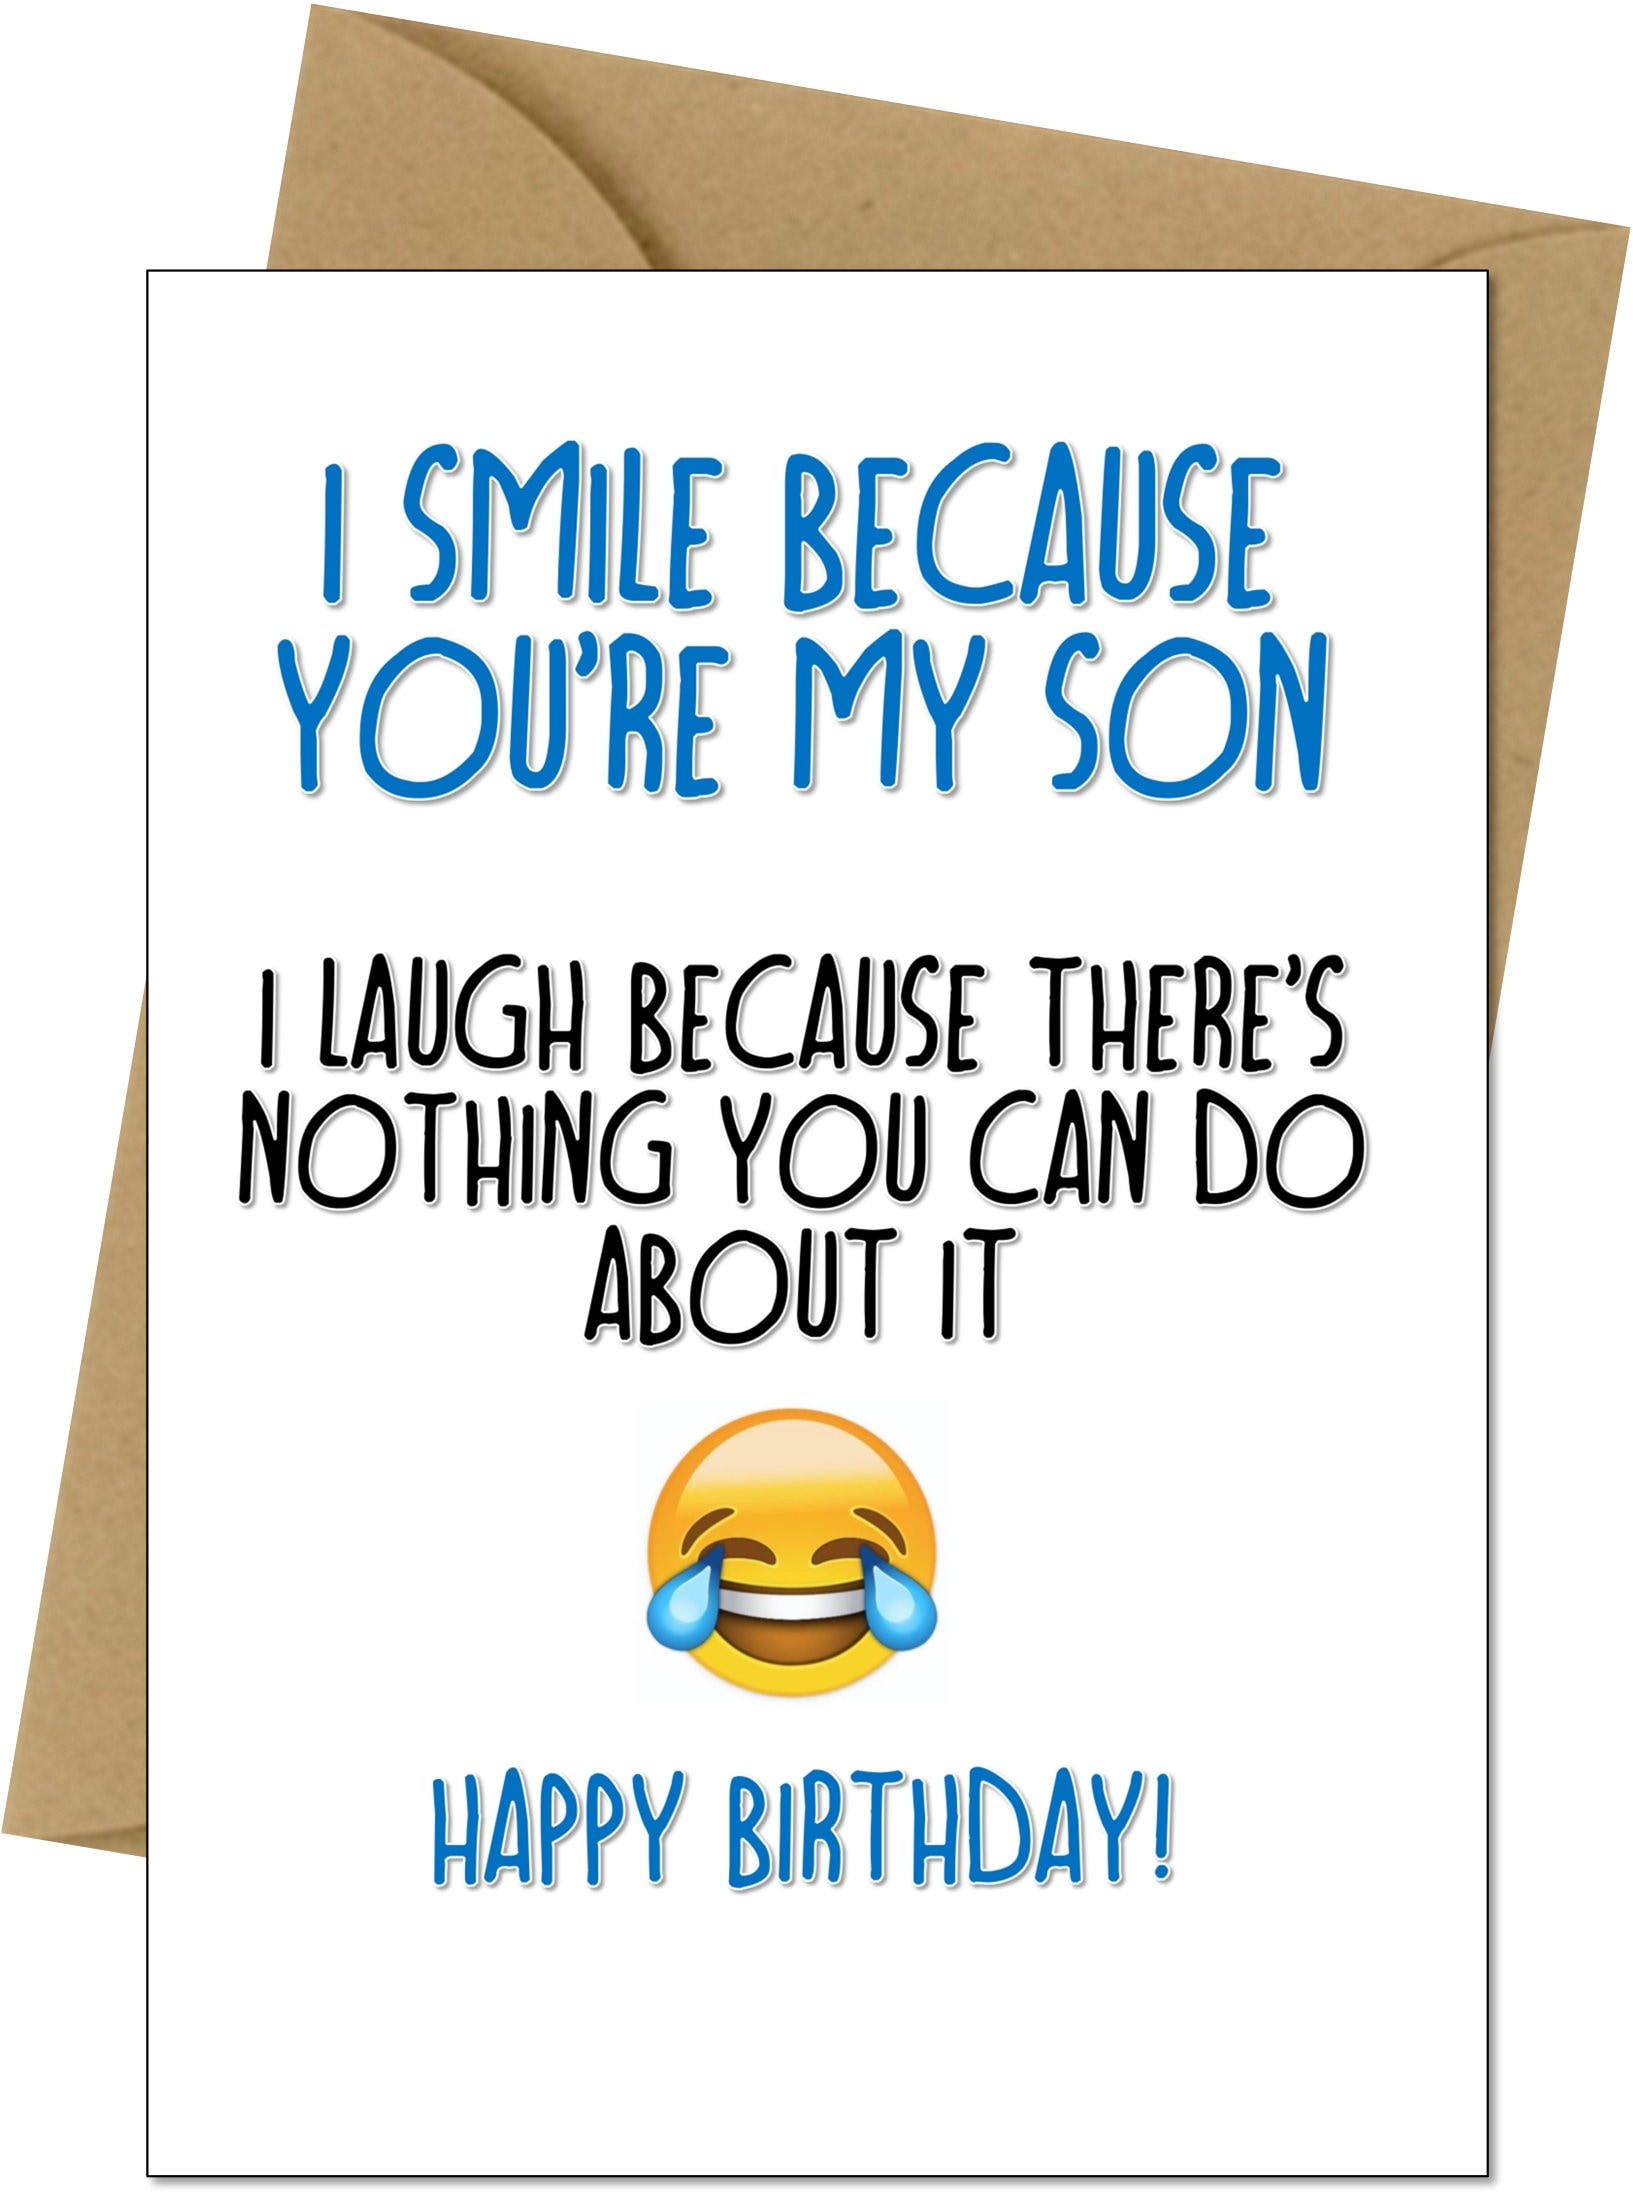 Funny Happy Birthday Card For Son Perfect For 30th 40th 50th | Etsy